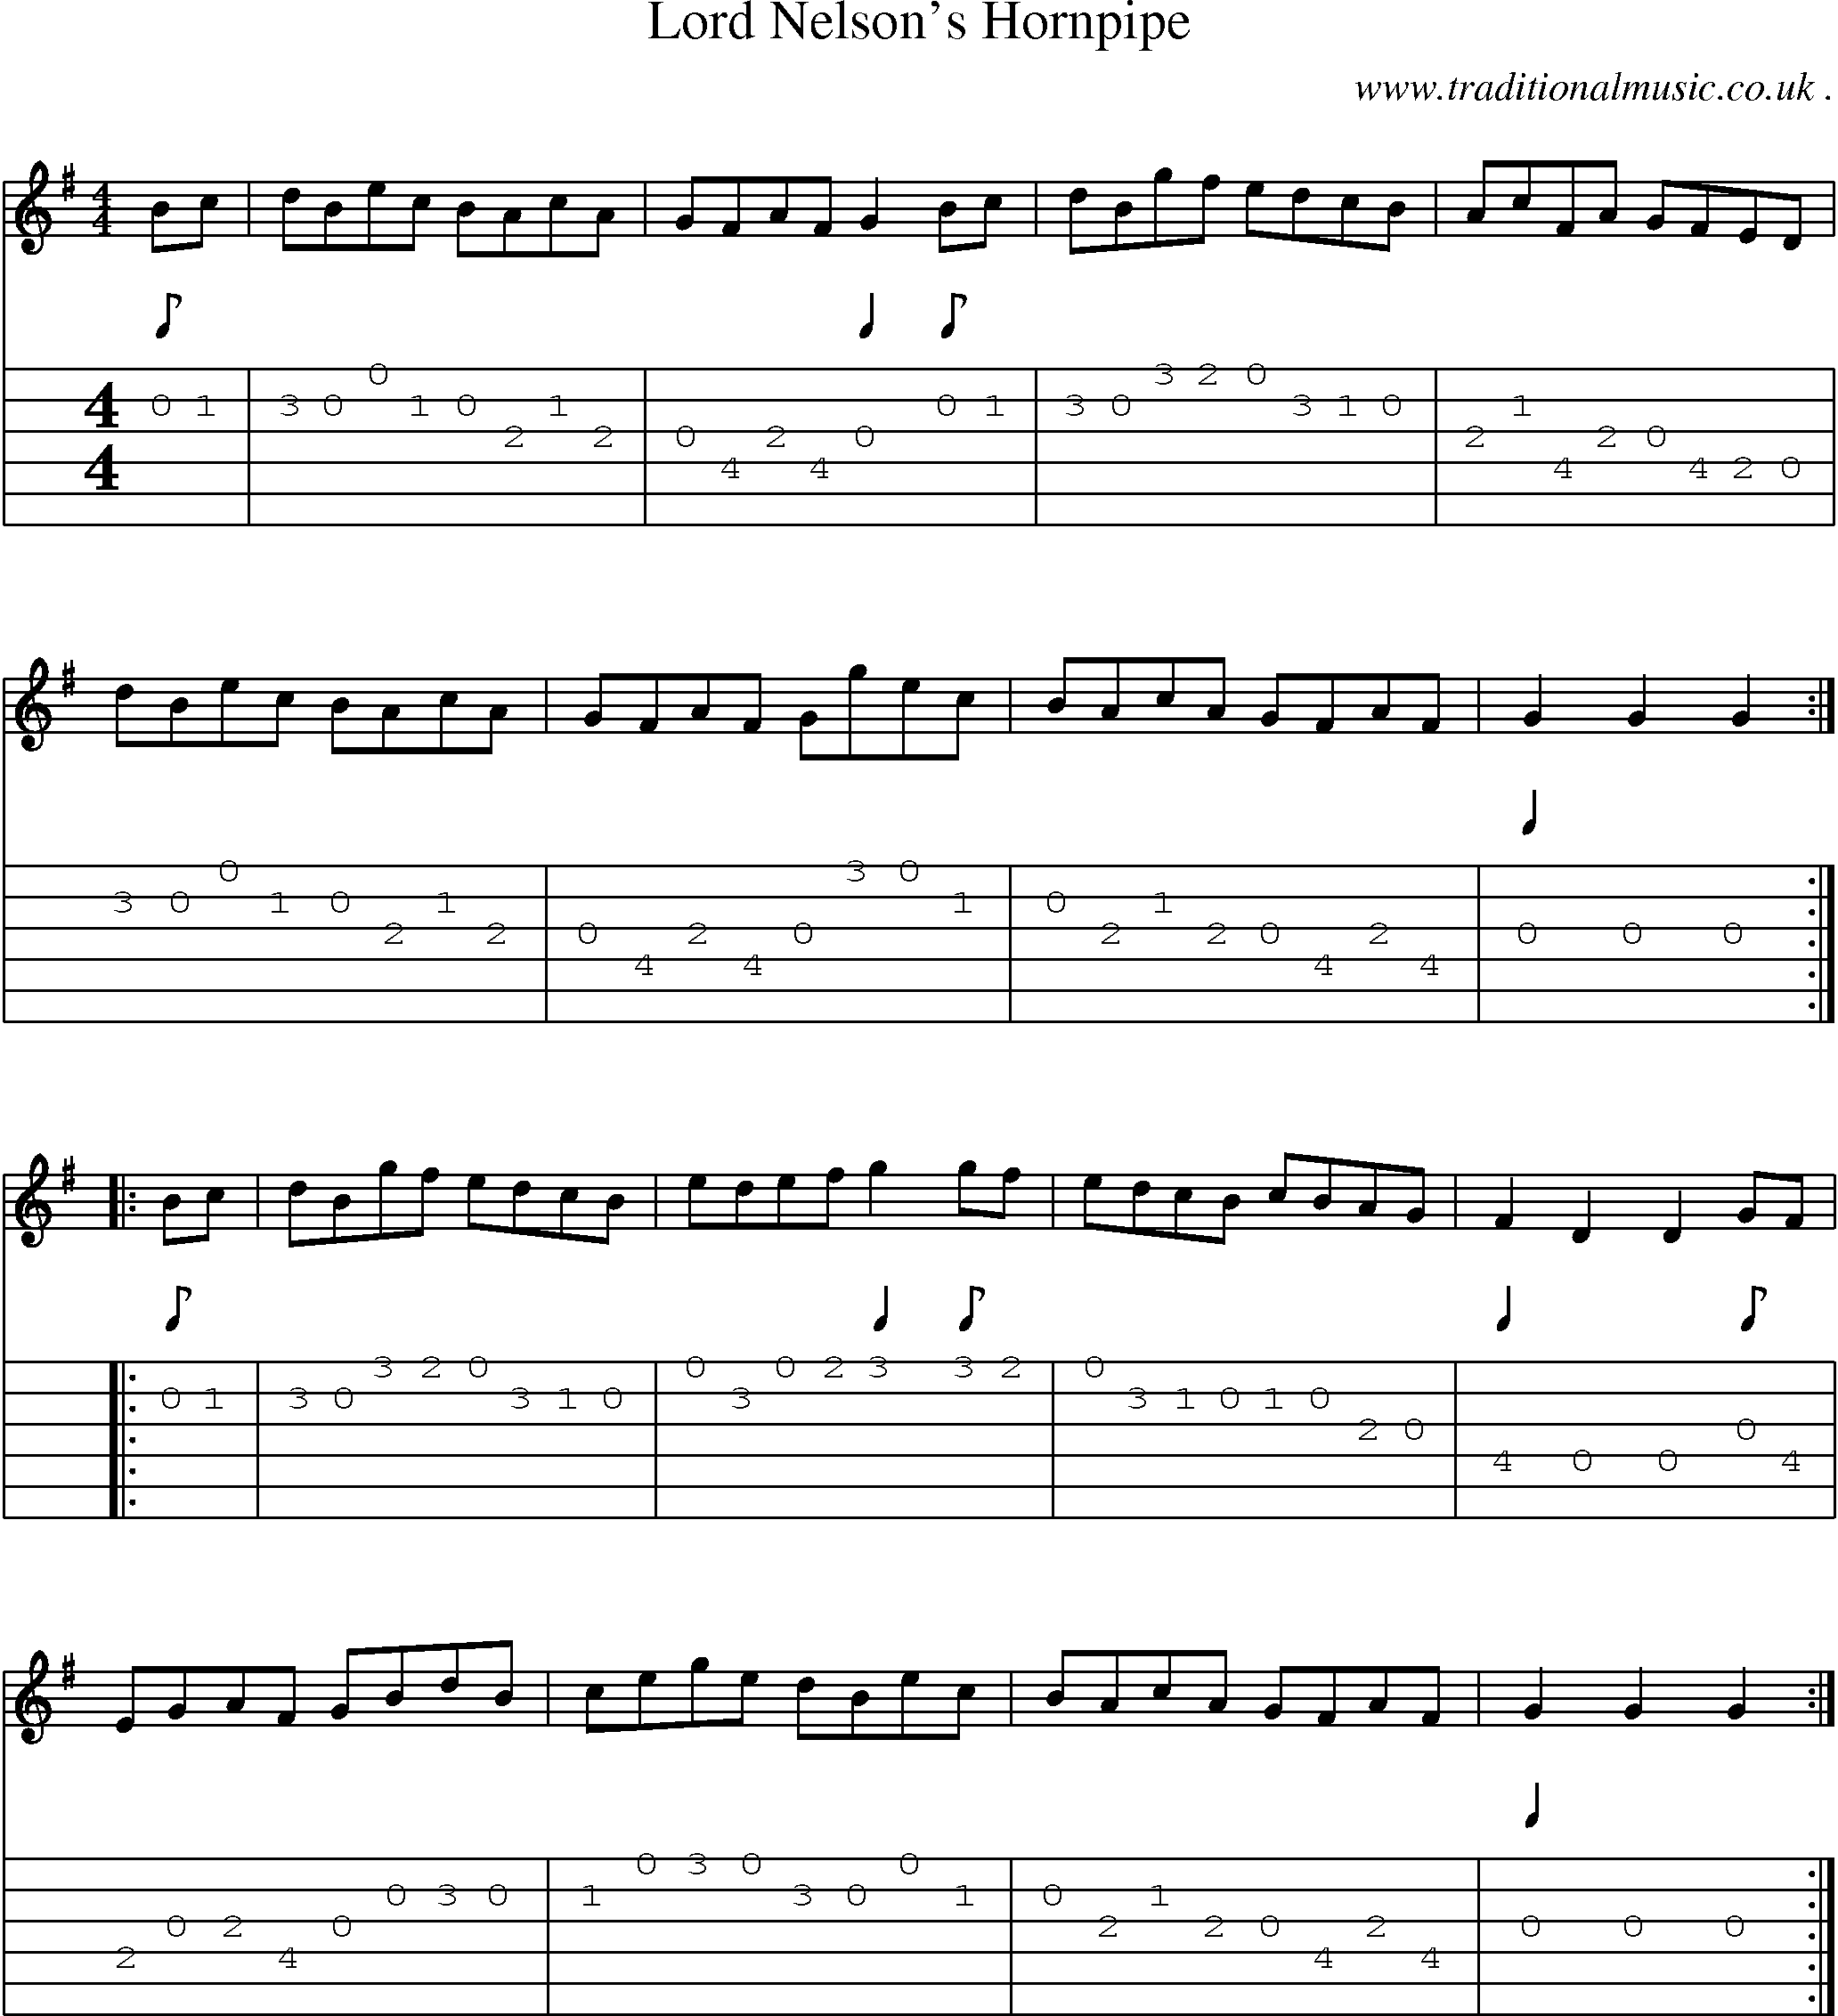 Sheet-Music and Guitar Tabs for Lord Nelsons Hornpipe